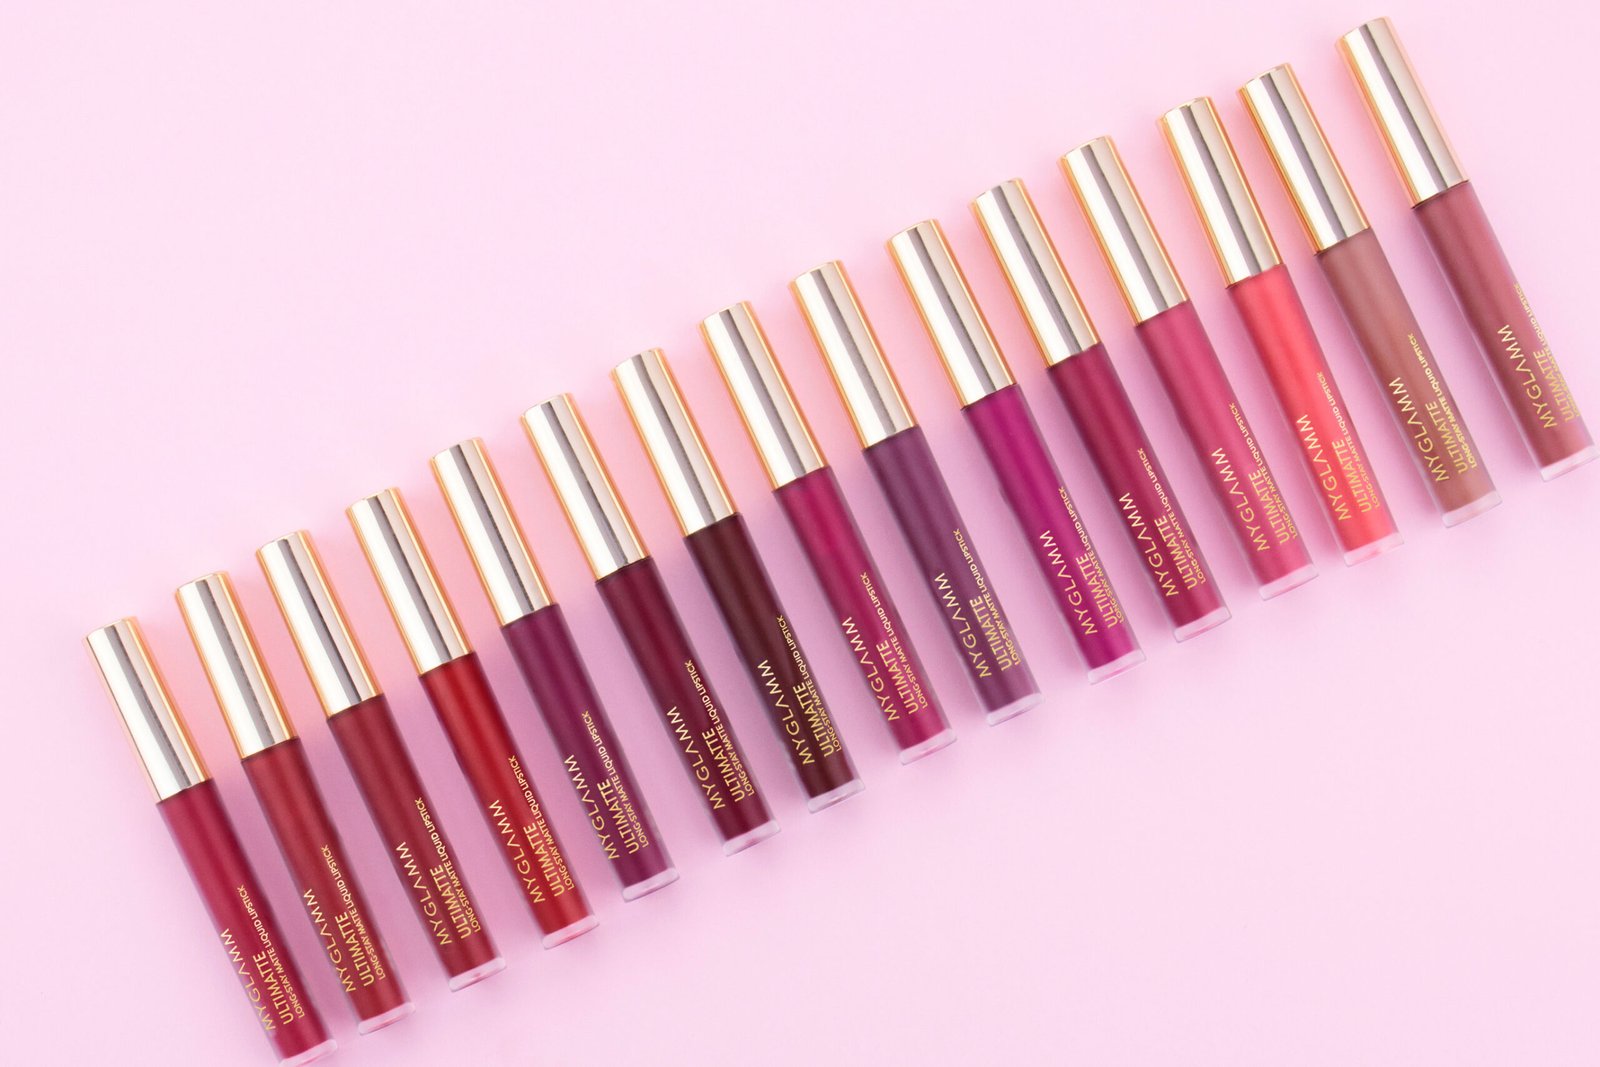 Introducing You To The Mattest Matte With The  Myglamm Ultimatte Long-Stay Matte Liquid Lipstick In 15 Shades